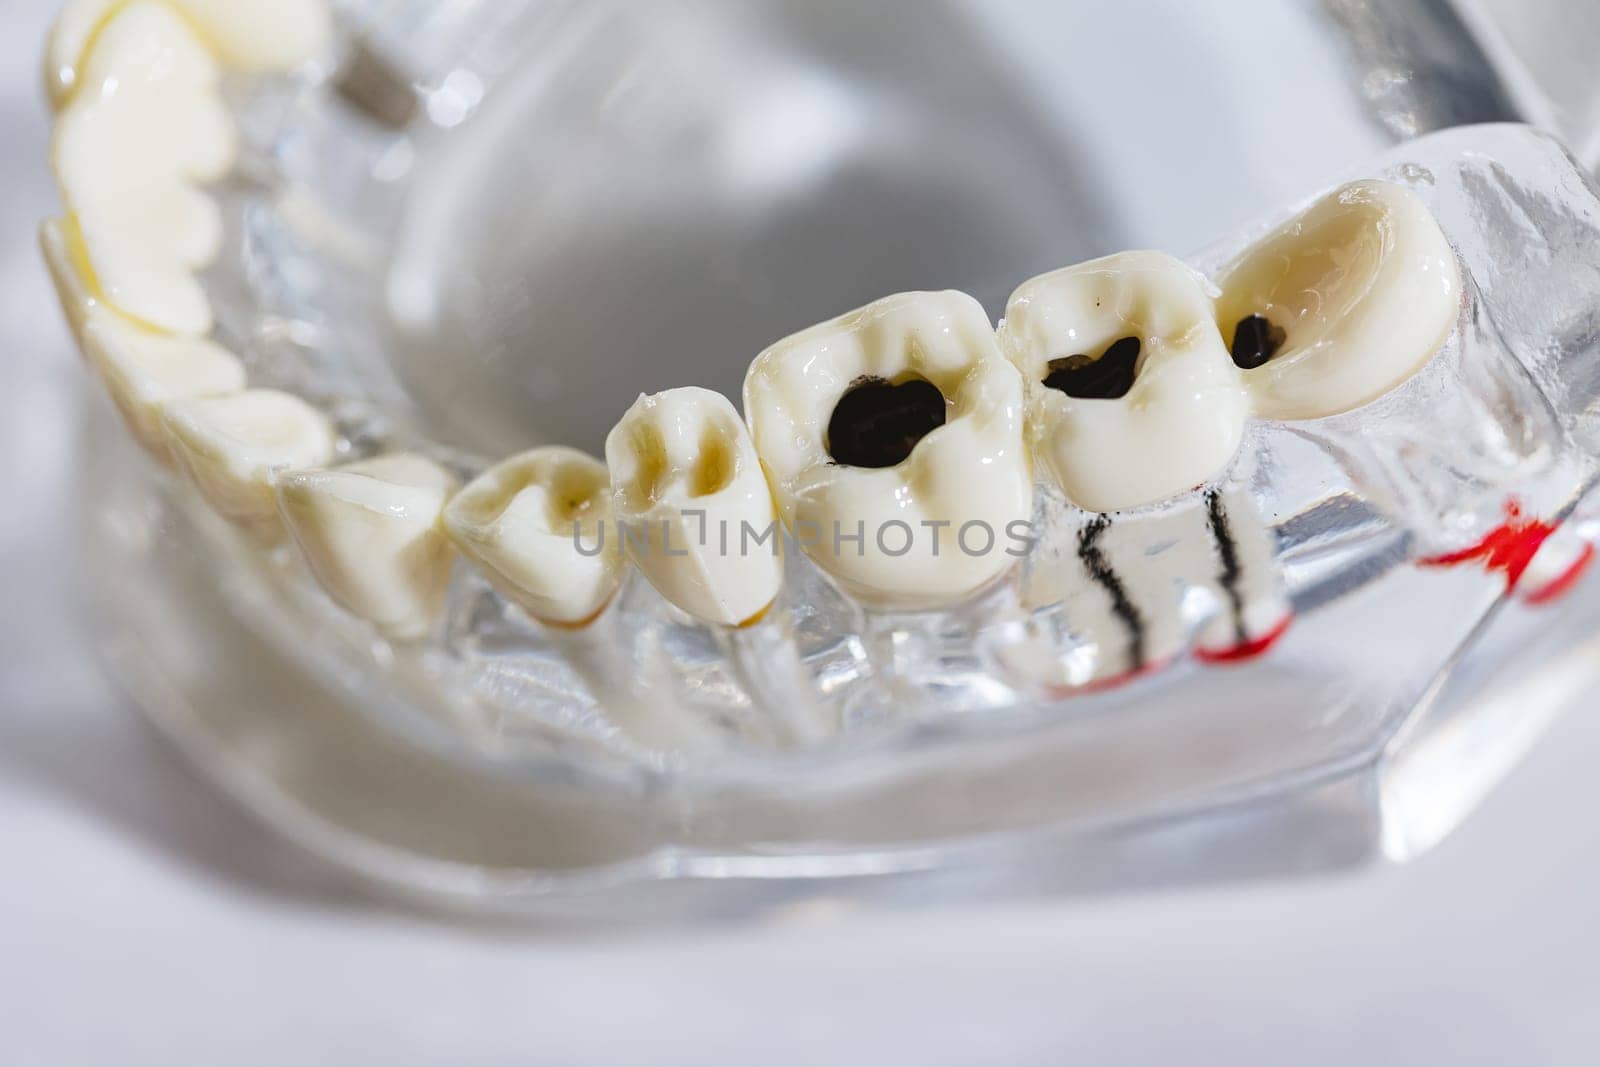 Caries tooth model, oral care concept. Dental model present common dental disease such as caries, wisdom tooth. Oral health. Copy space. Problems with teeth health